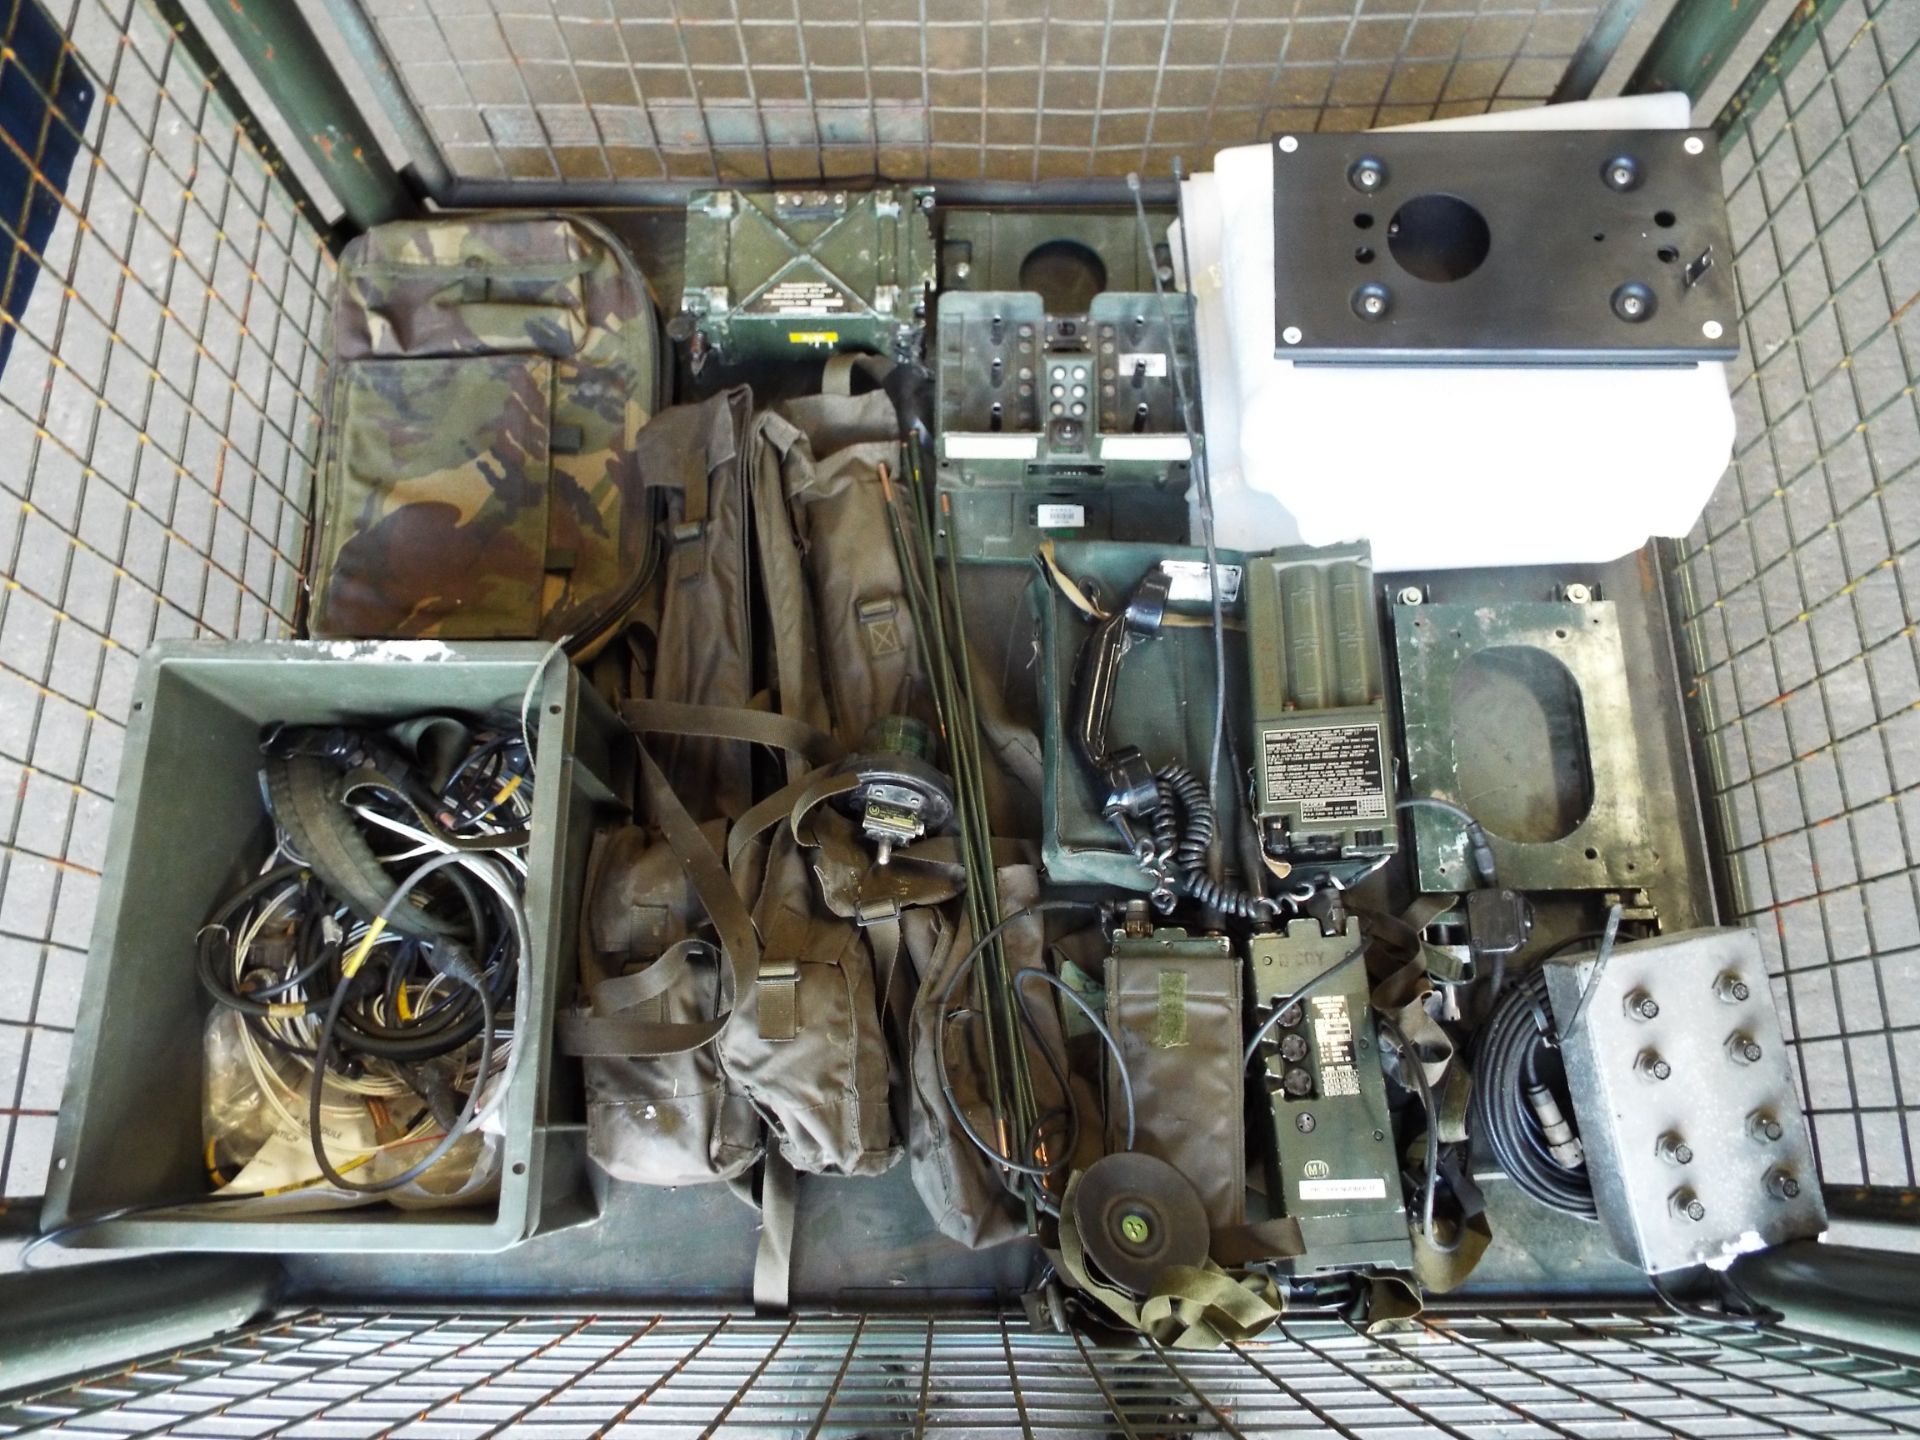 Mixed Stillage of Clansman Inc. RT351, RT349's, Battery Charger, Mounting Plates, Antennae etc